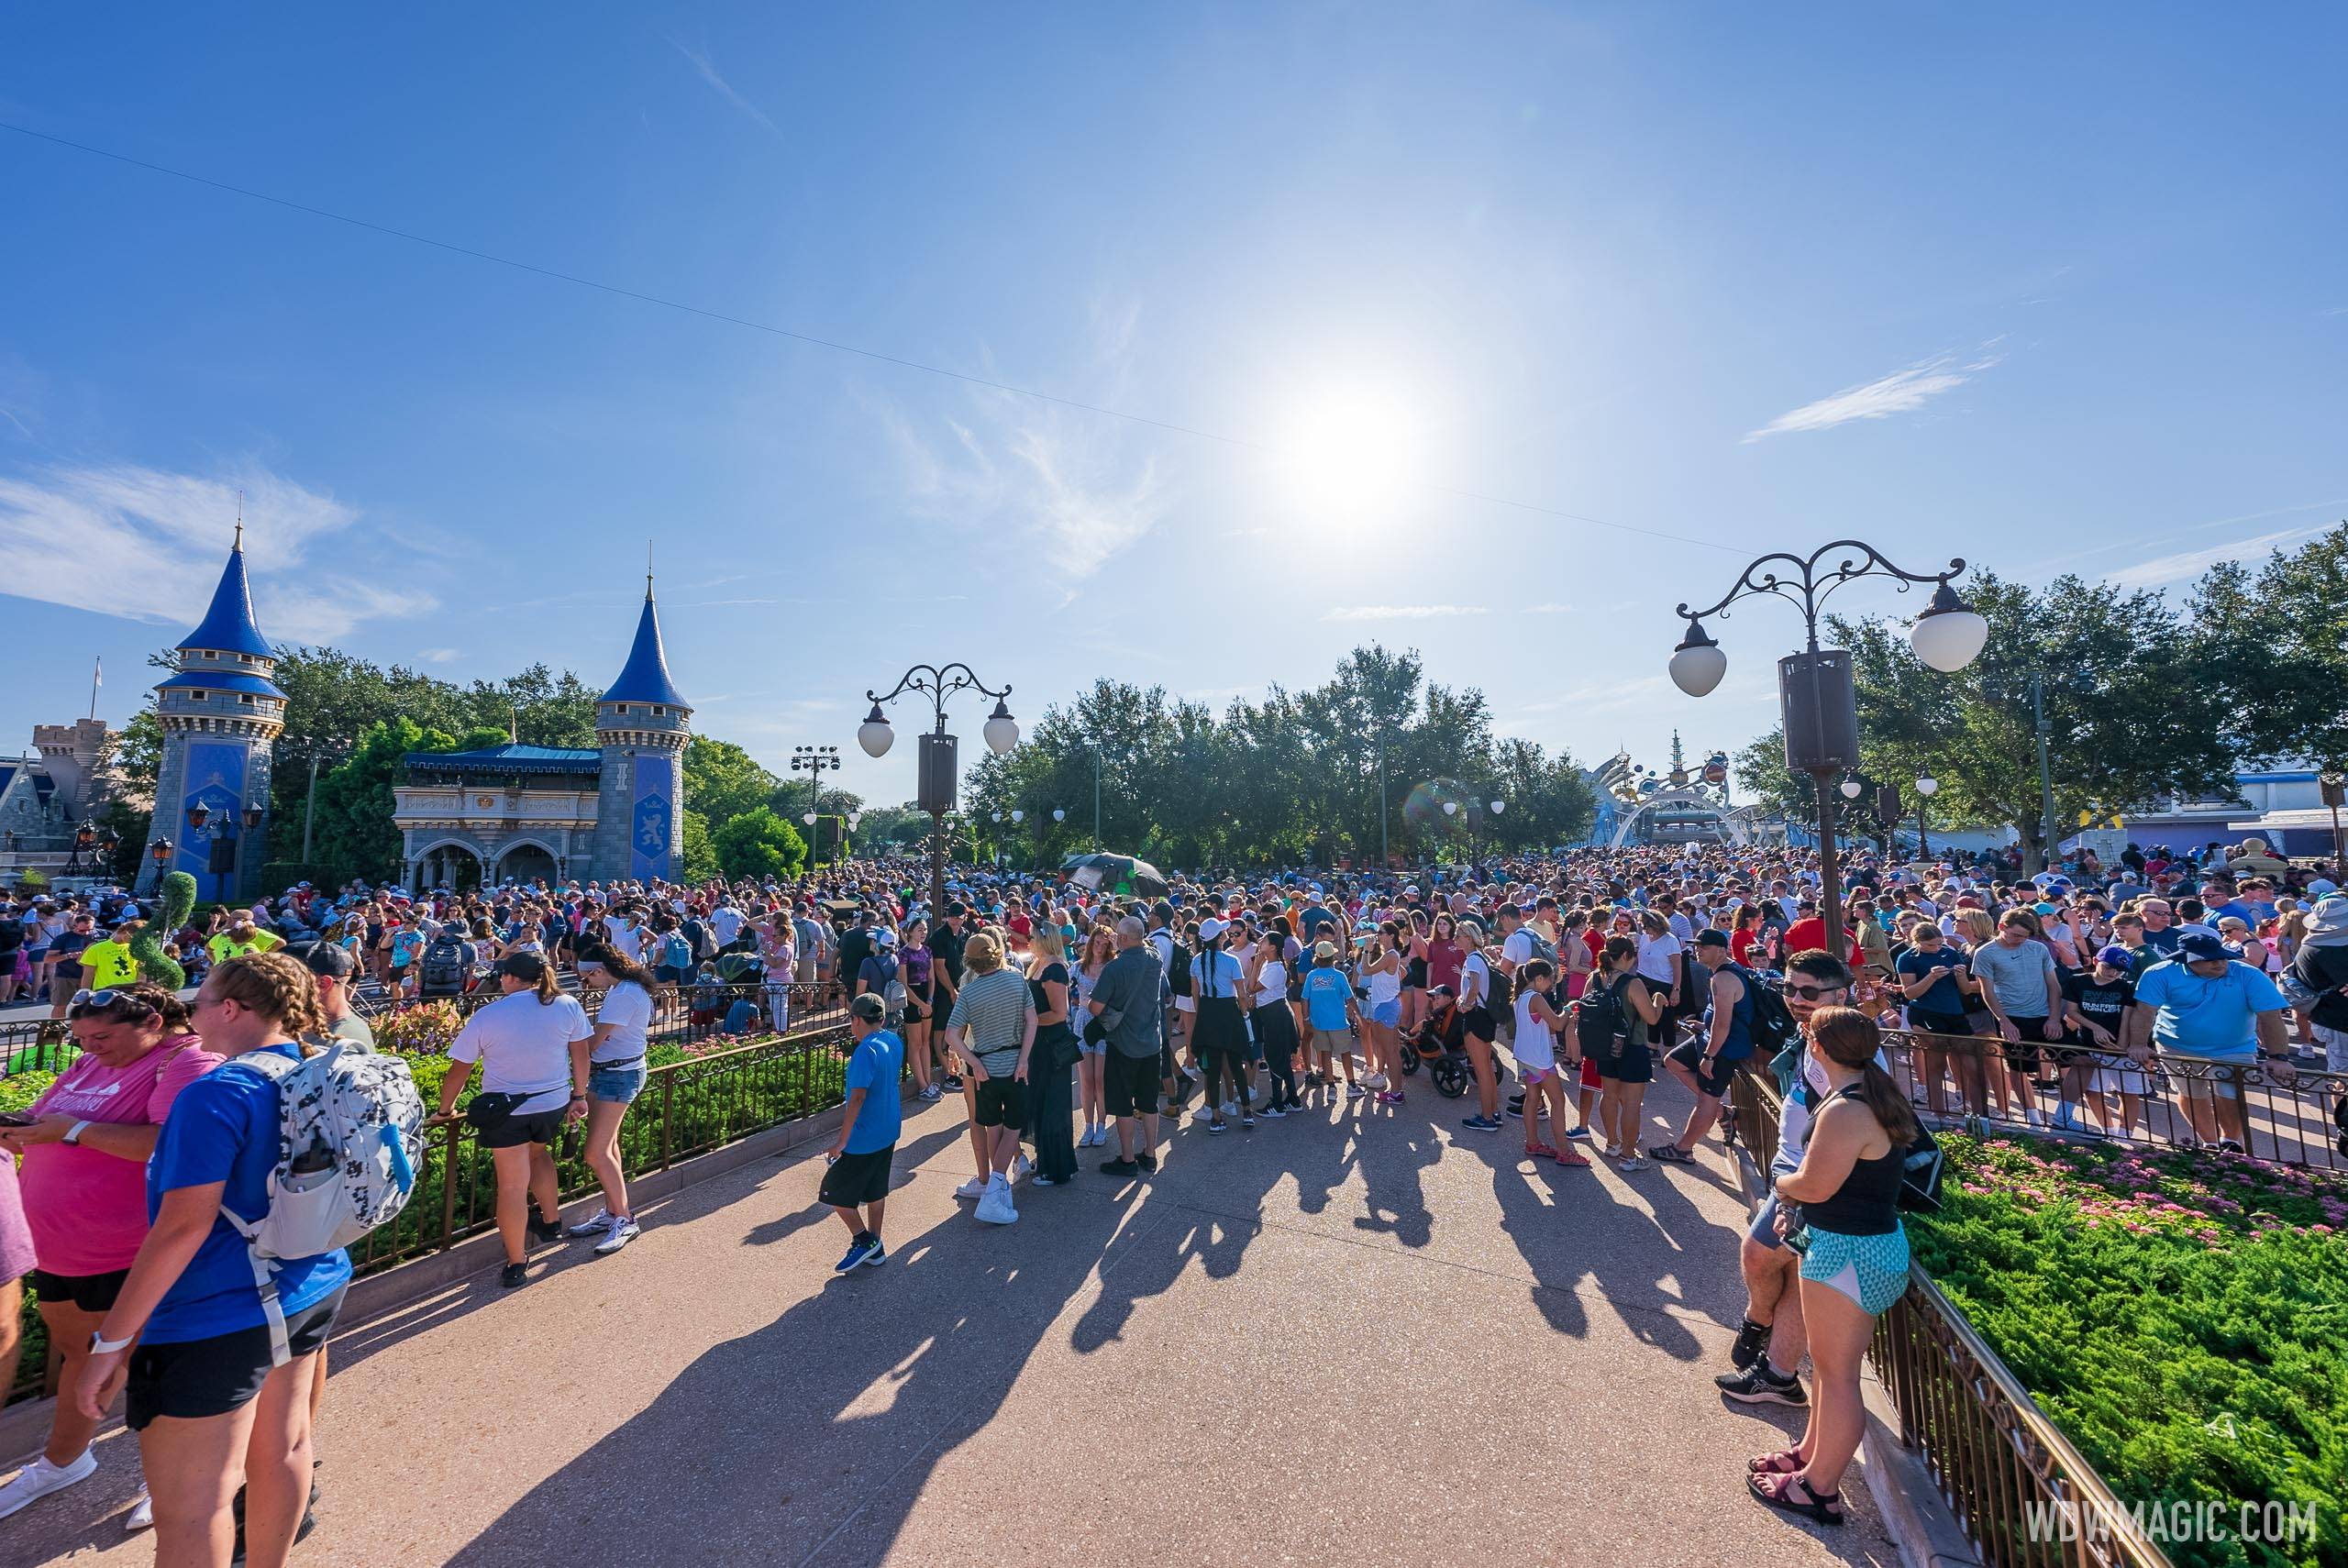 Guests continue to visit the Walt Disney World theme parks despite rising numbers in Florida